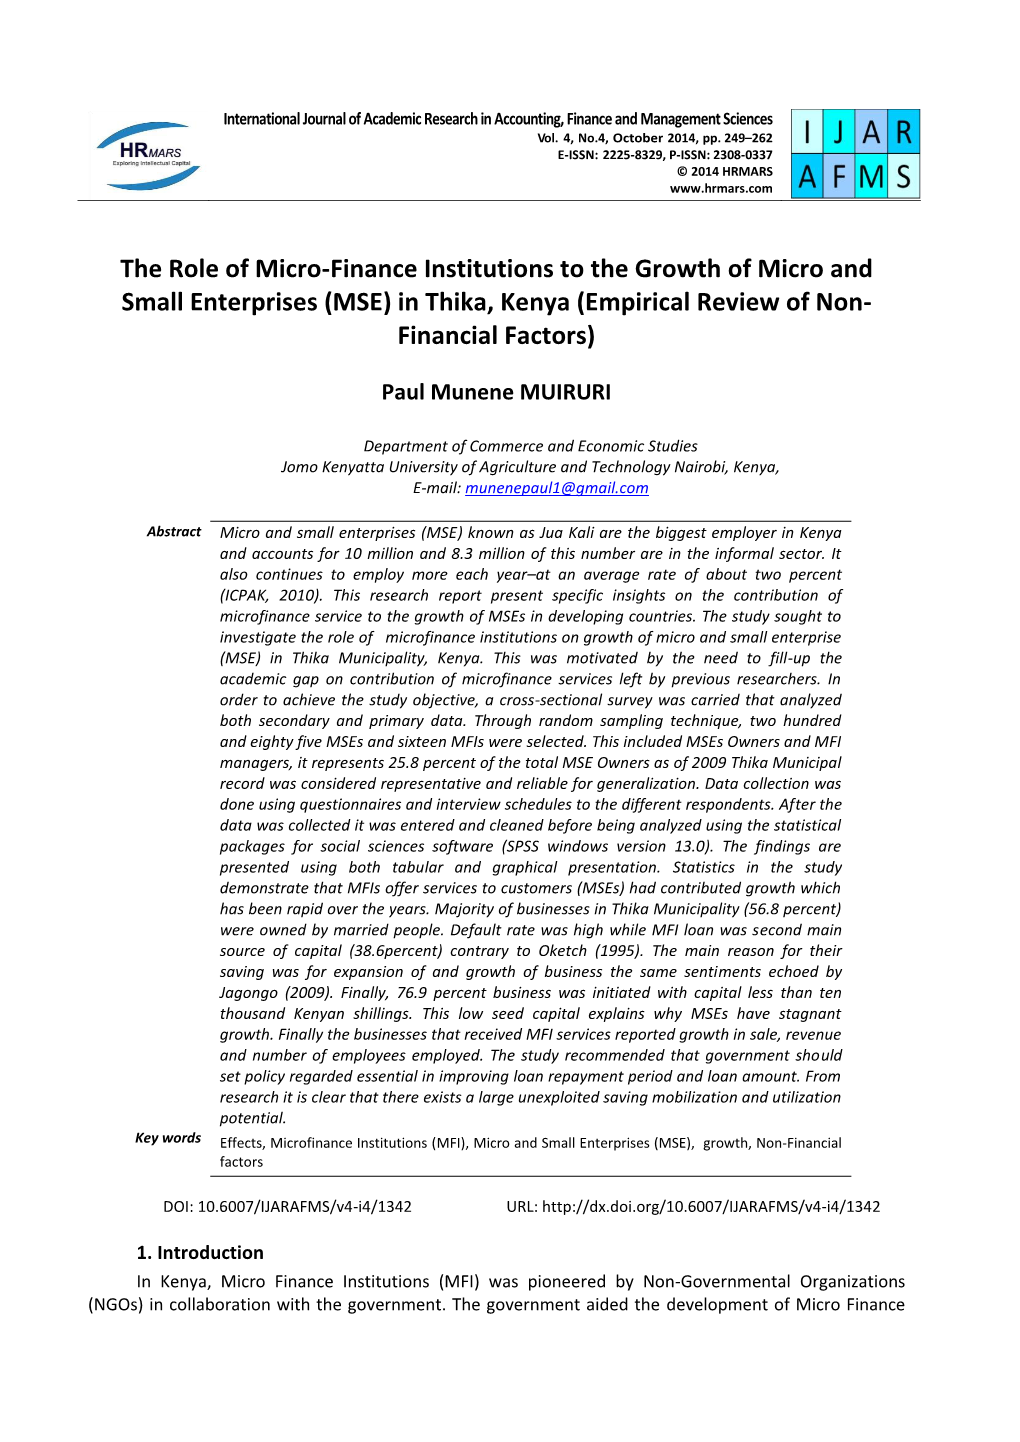 The Role of Micro-Finance Institutions to the Growth of Micro and Small Enterprises (MSE) in Thika, Kenya (Empirical Review of Non- Financial Factors)